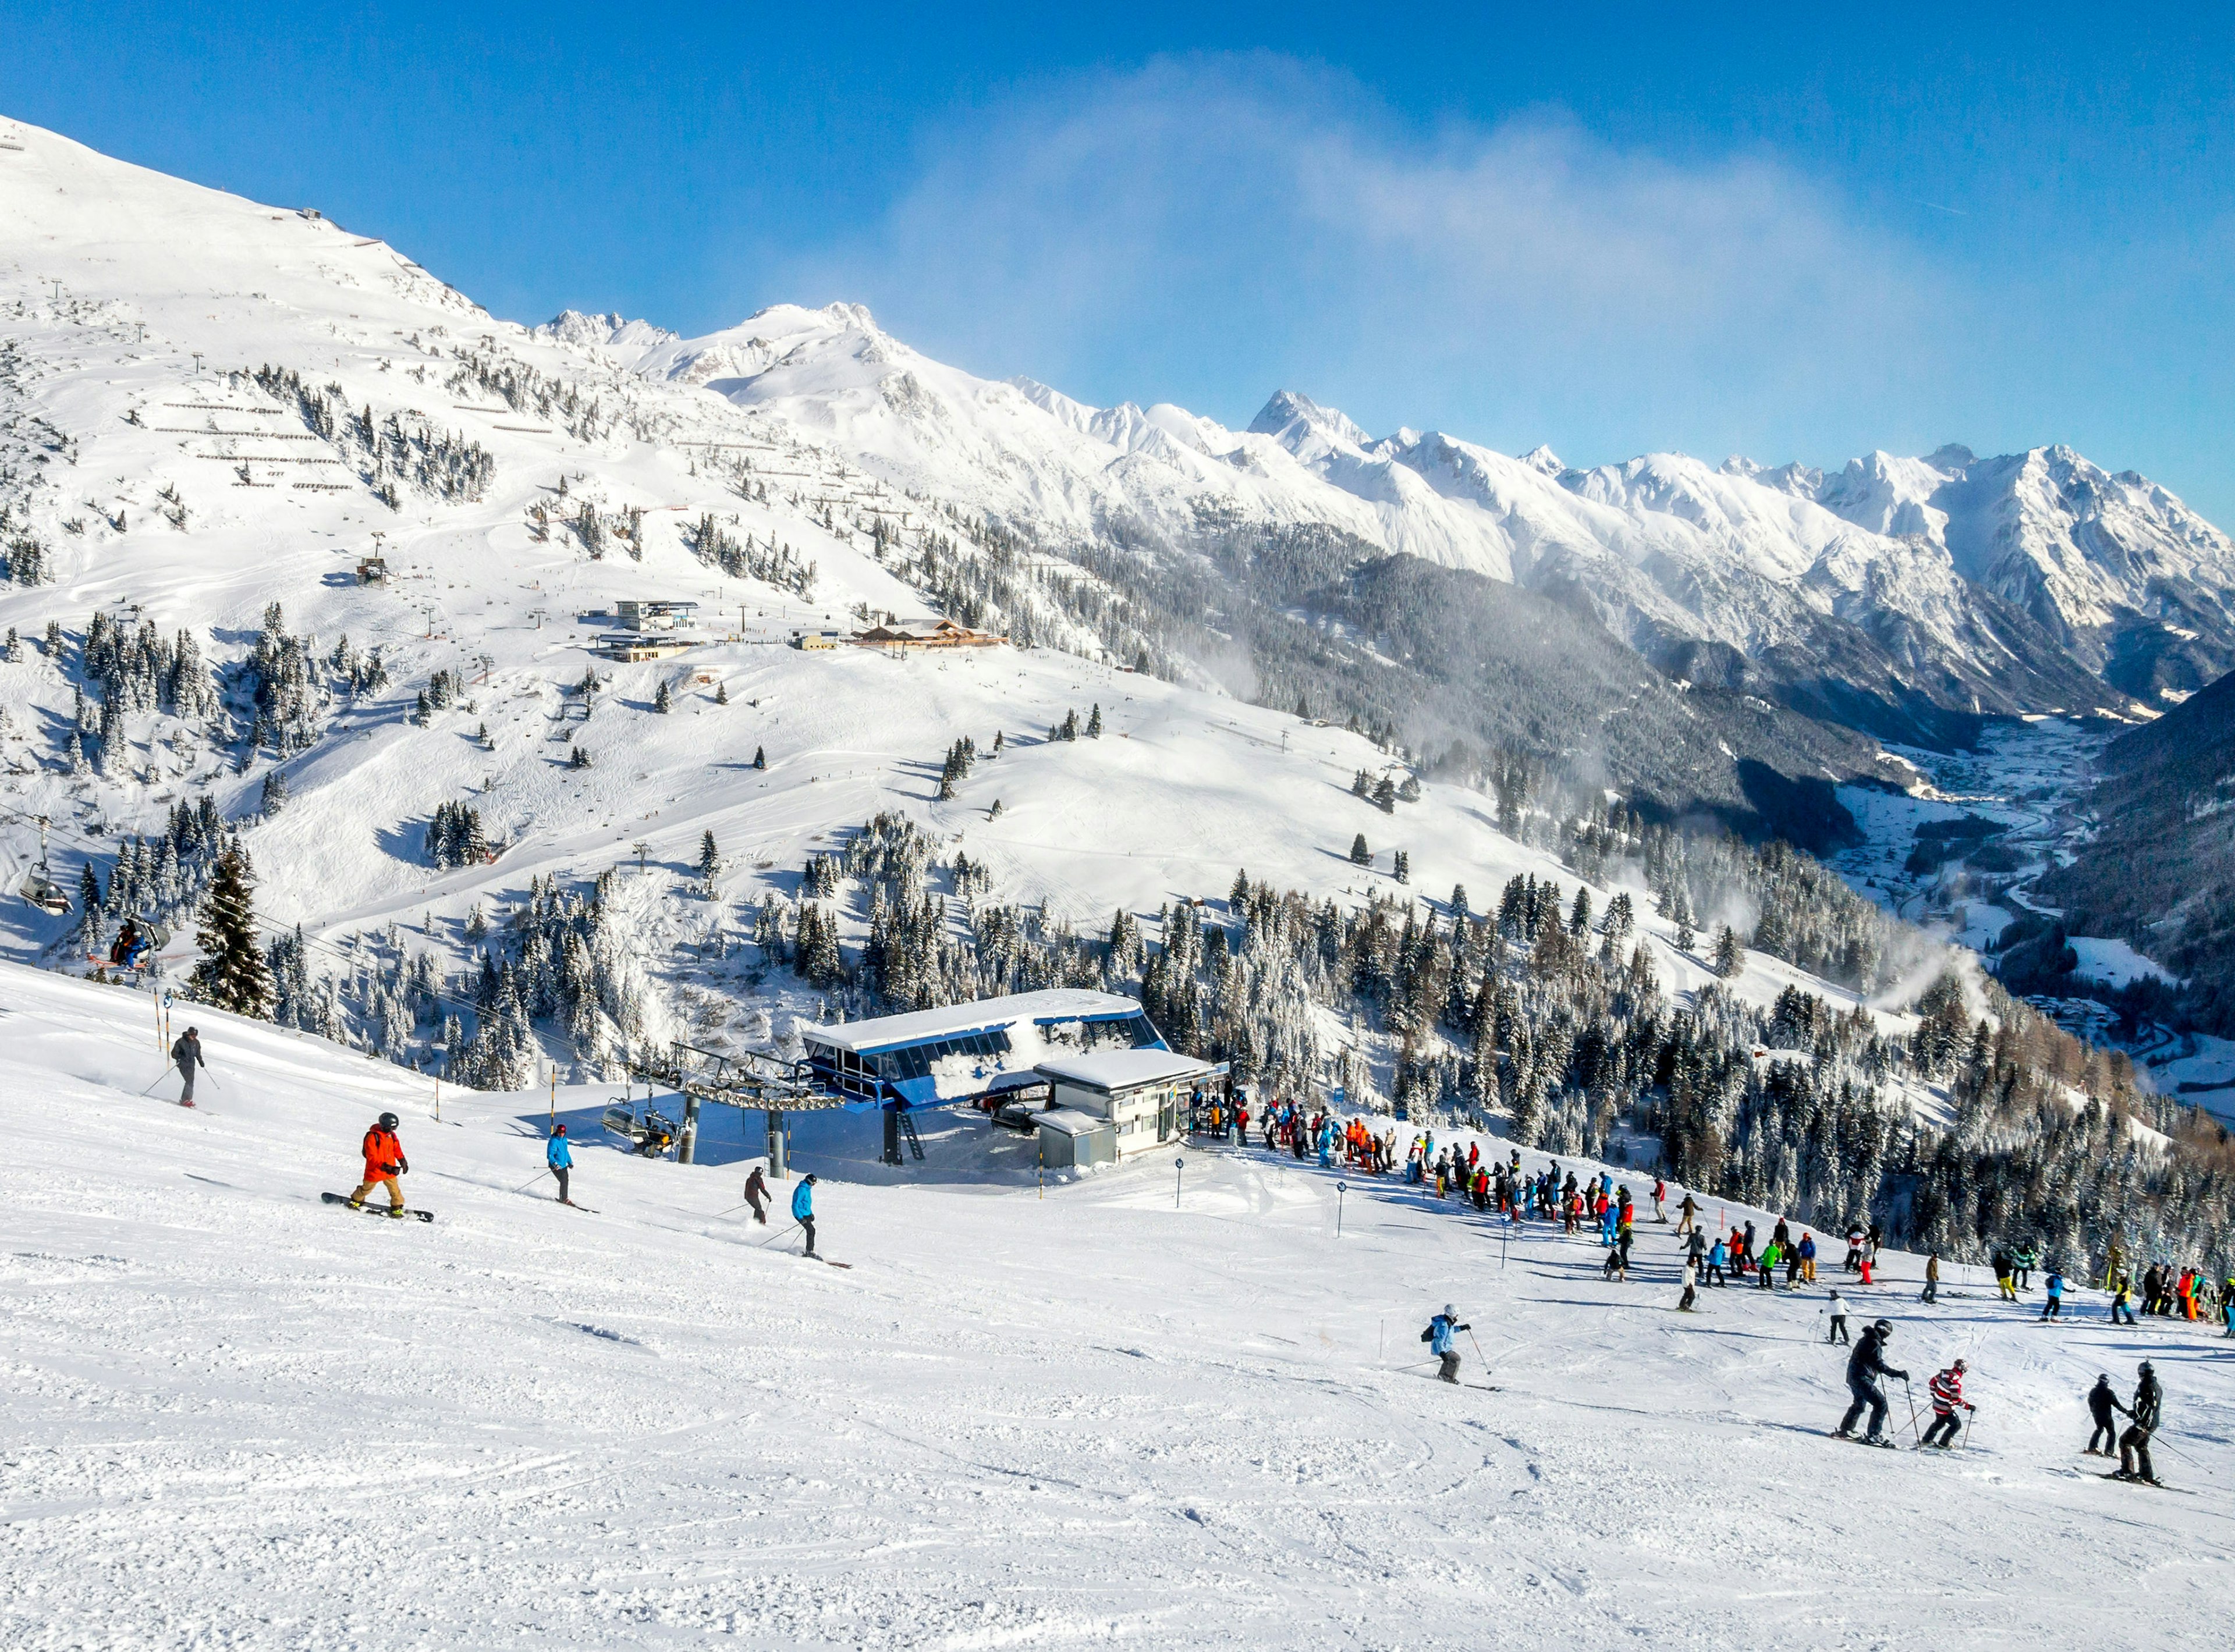 Skiers and snowboarders on the slopes of the St. Anton winter resort.